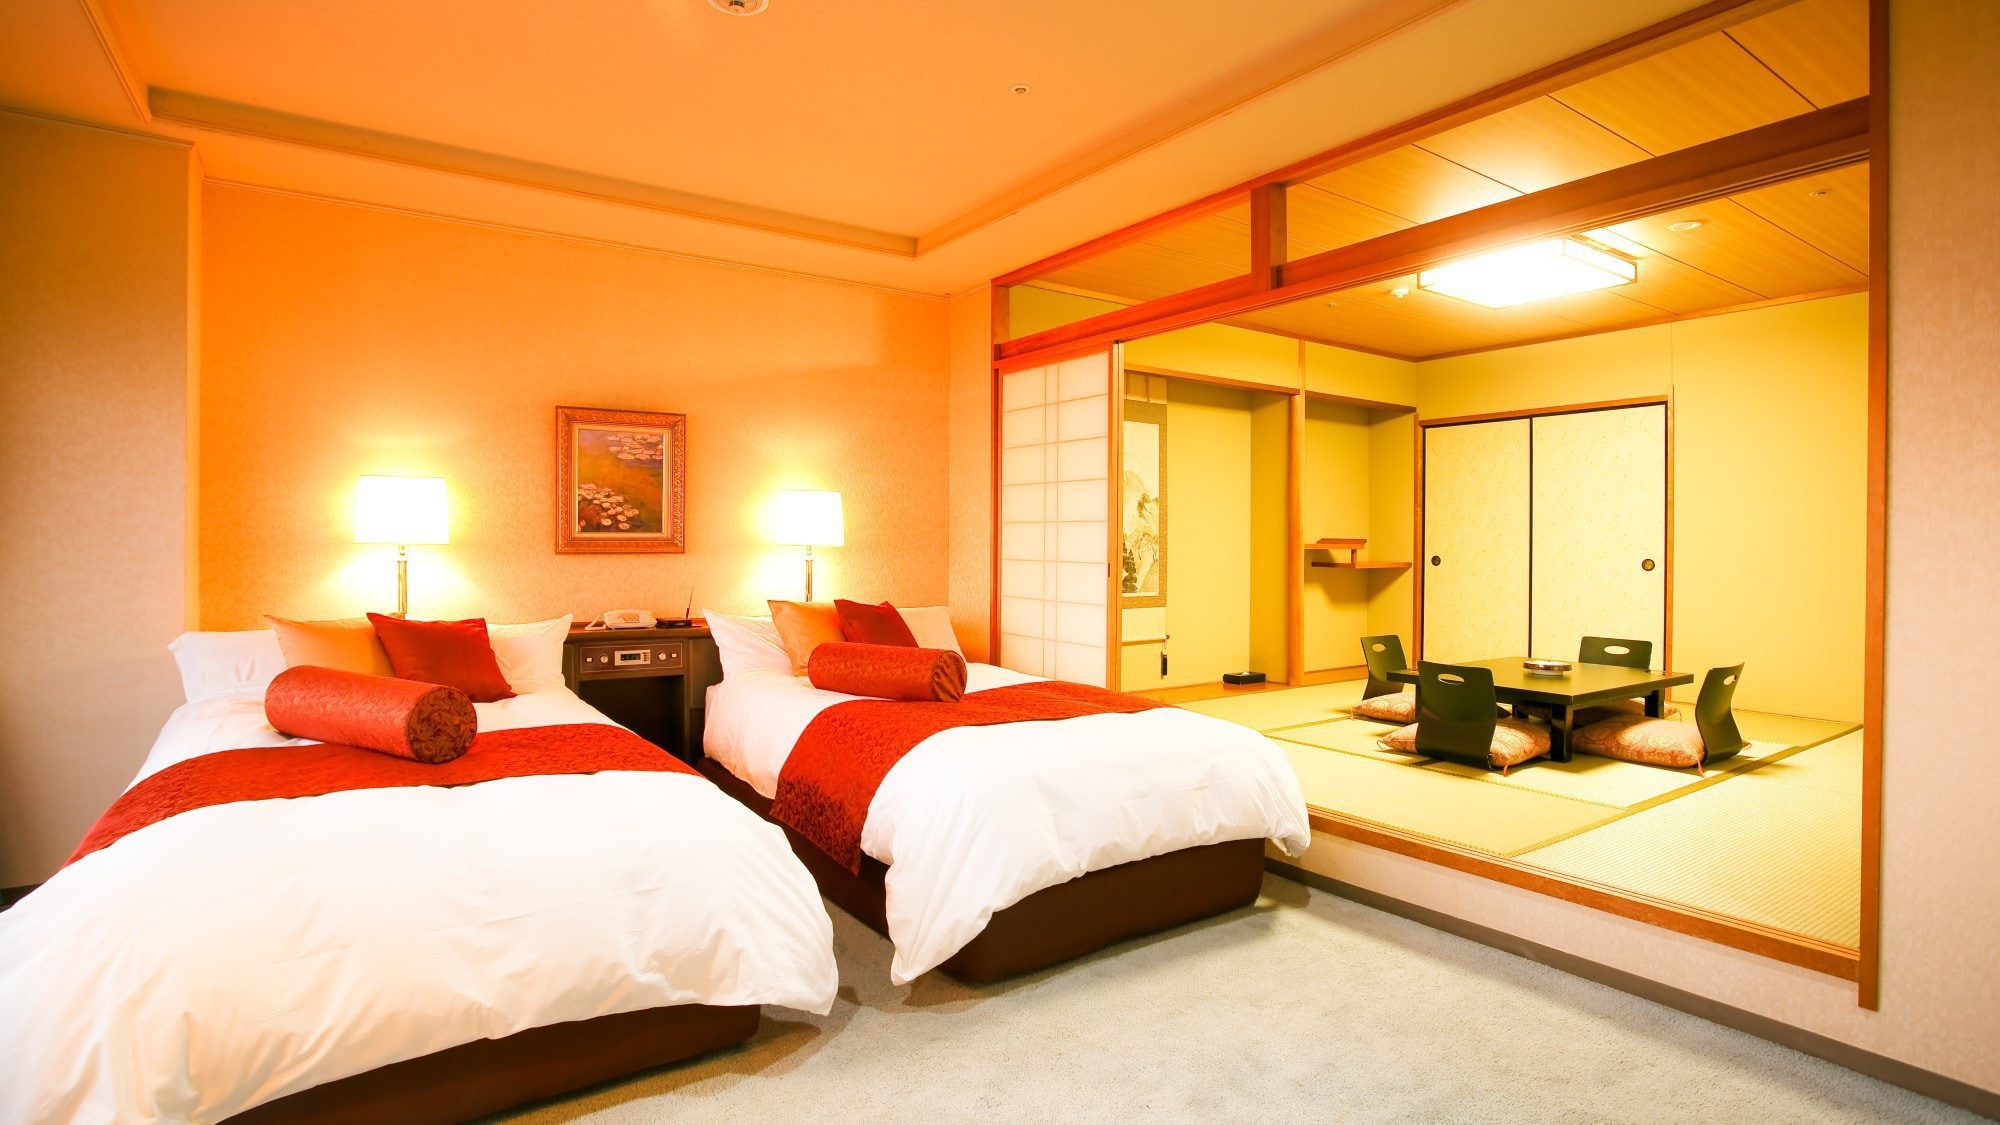 The suite is a separate type of bathroom and toilet, and is recommended for stays with small children.